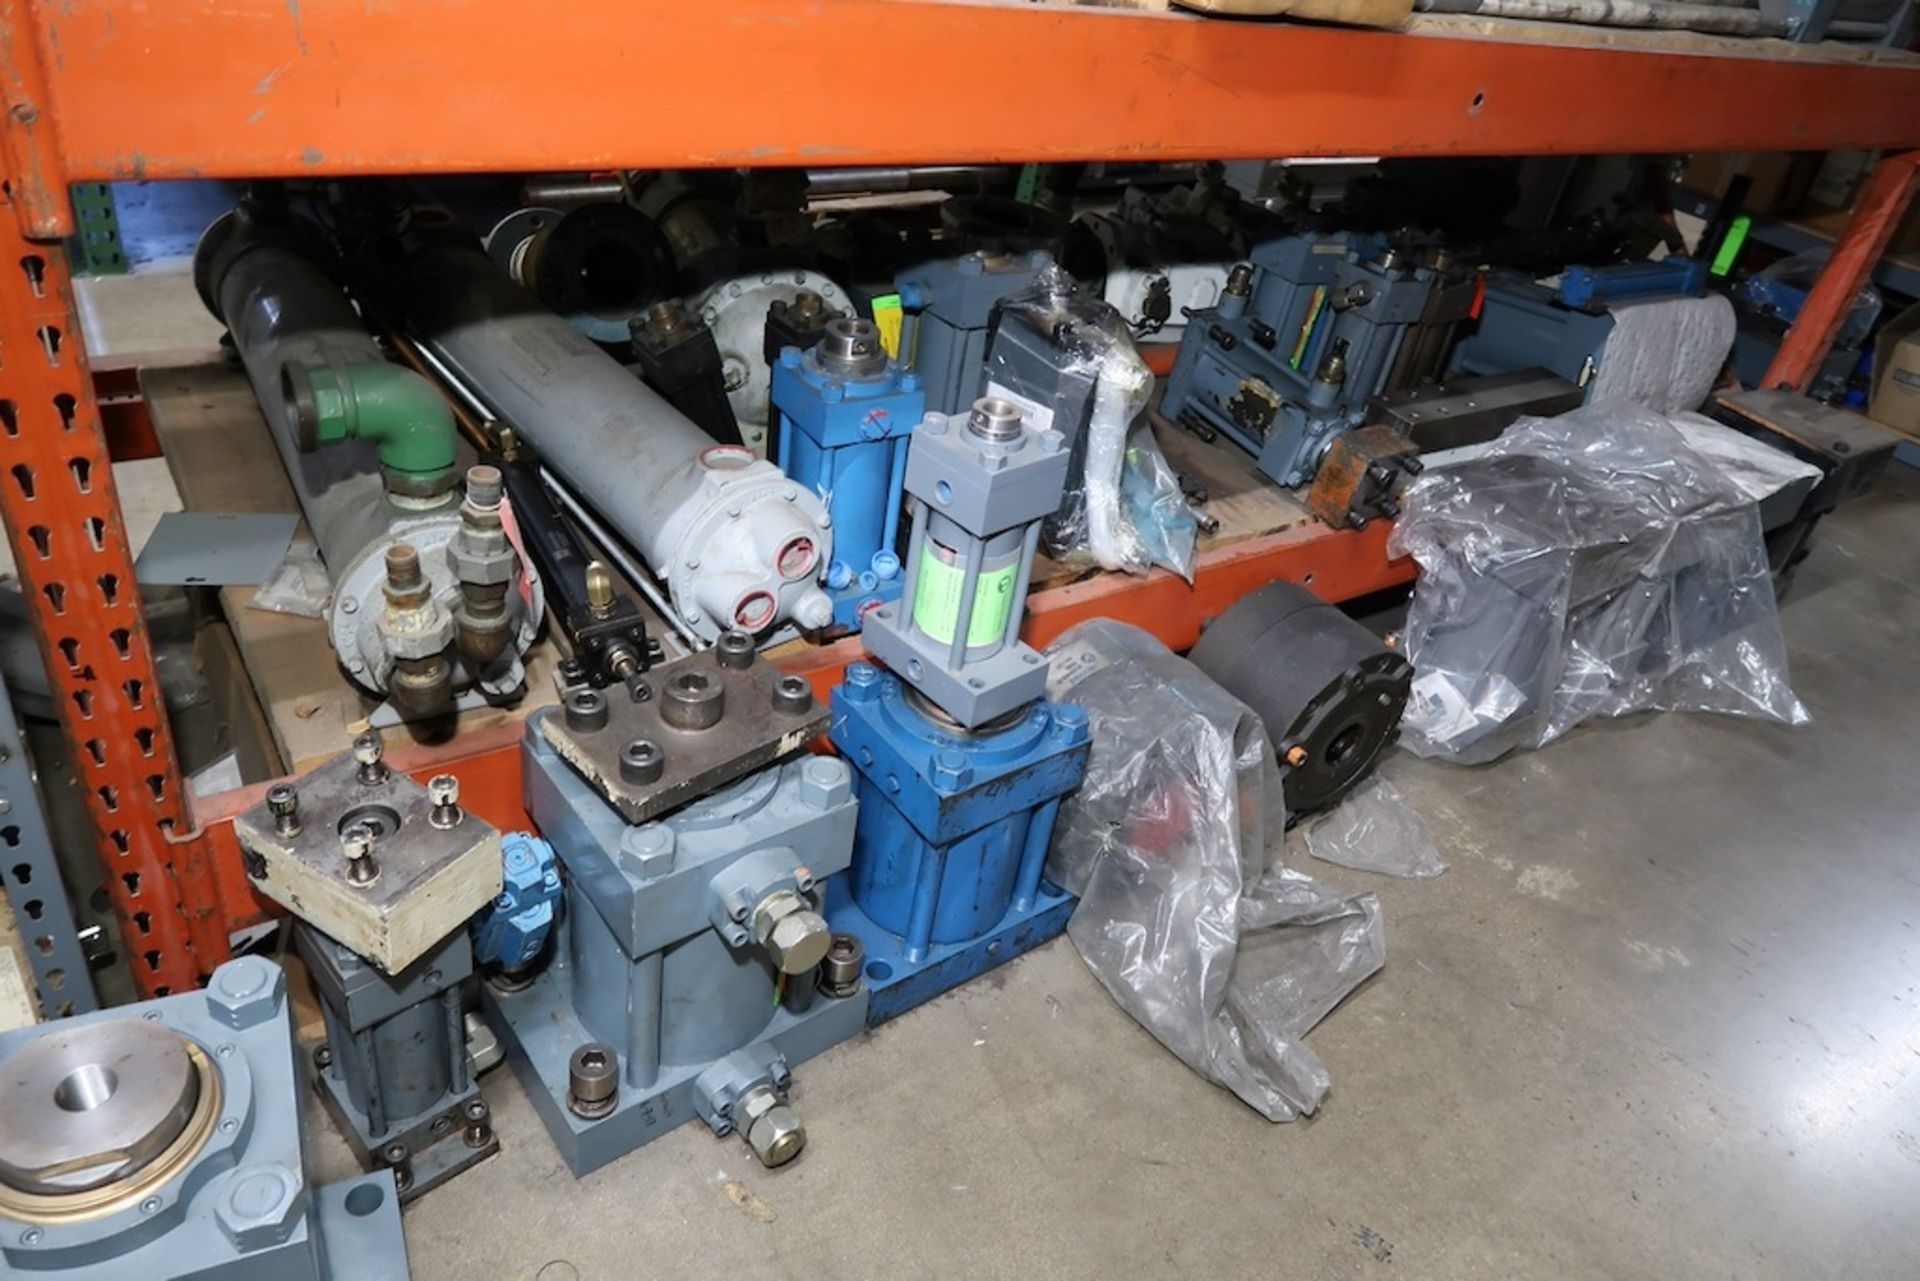 (1) Section of Pallet Racking with Assorted Spare Parts, Hydraulic Pumps, Heat Exchangers, Etc. - Image 18 of 18